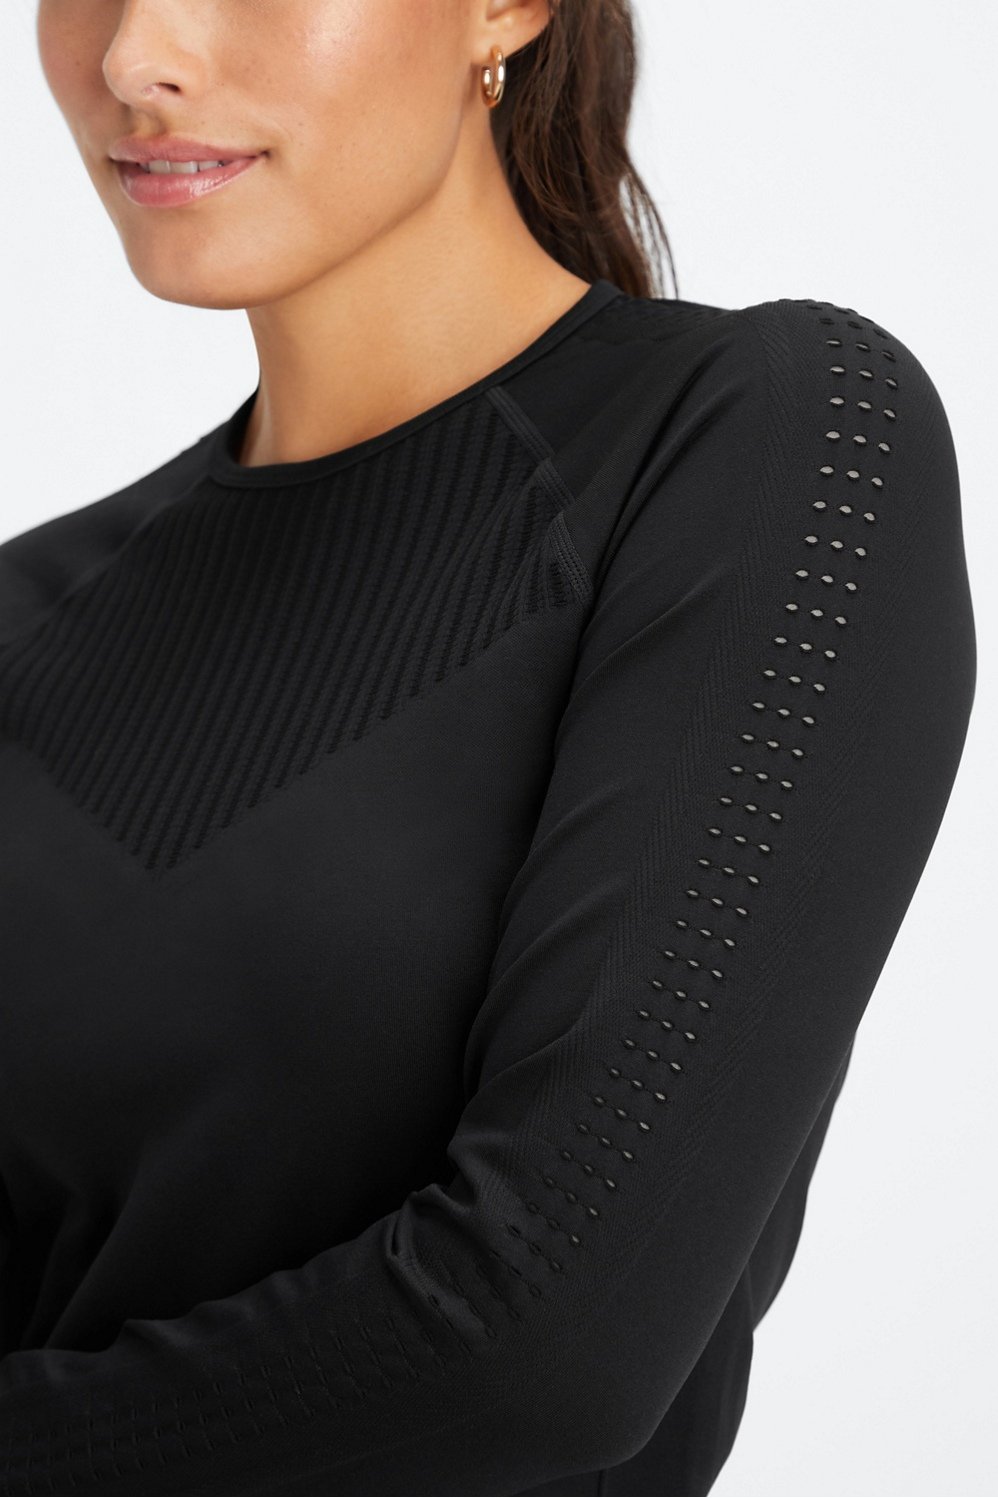 Sync Seamless Long-Sleeve Top Fabletics 